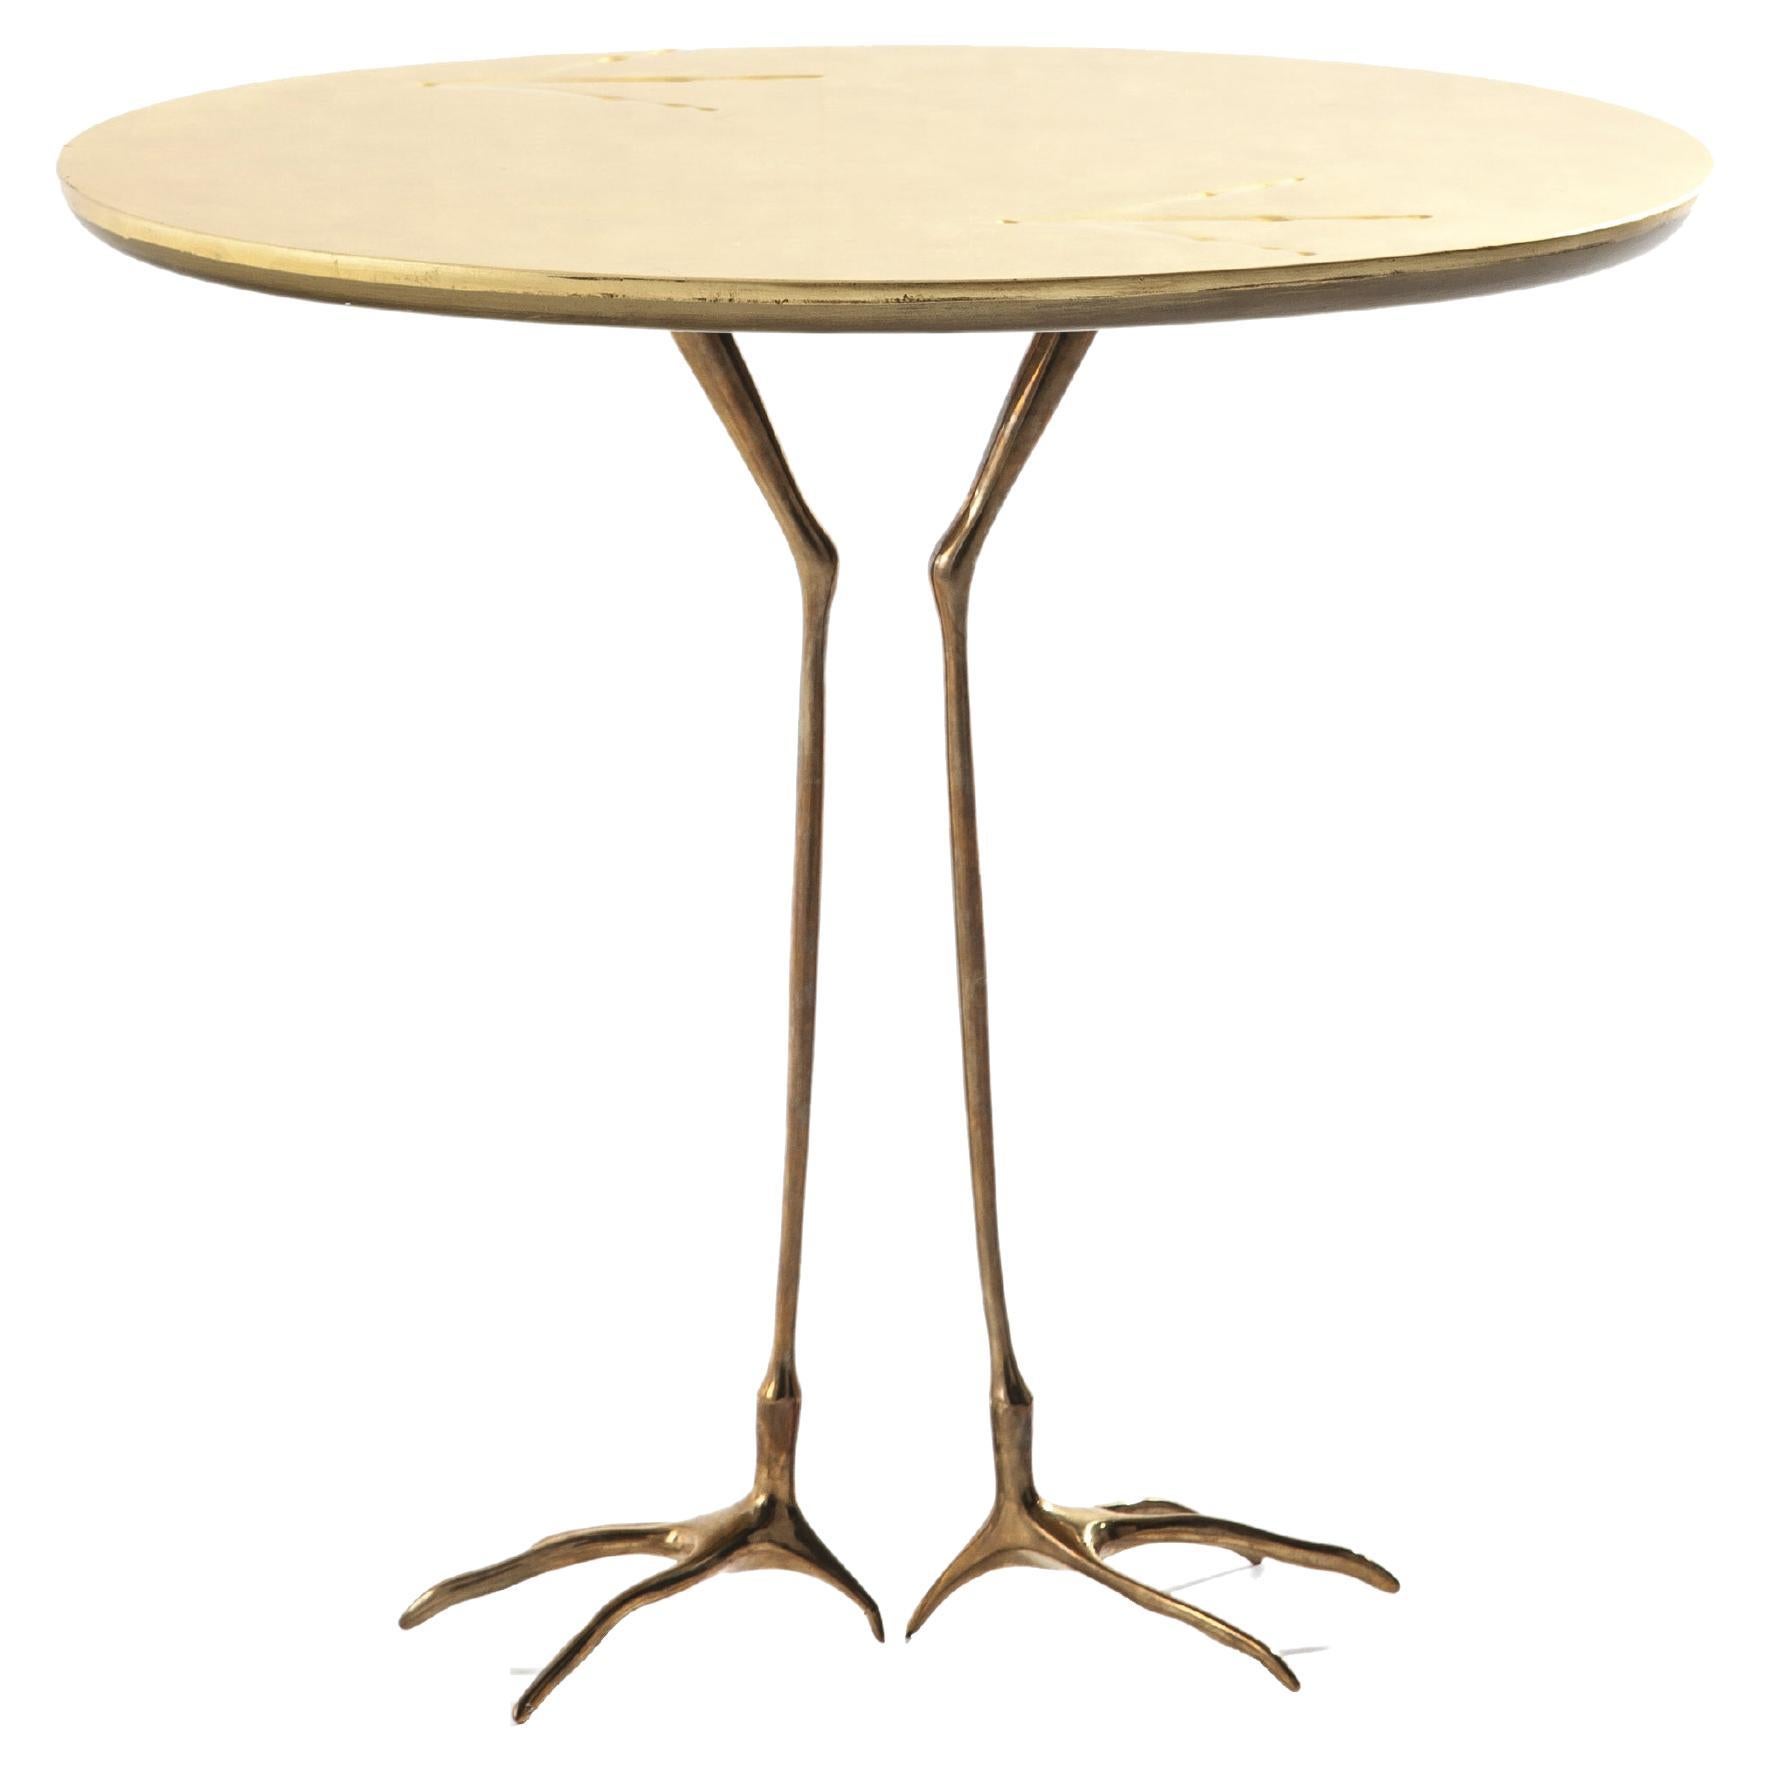 Meret Oppenheim Traccia sculptural table
Manufactured by Cassina in Italy.

In 1971, Dino Gavino launched what he called “l’opera d’arte funzionale”, or functional artworks, in so doing inaugurating a new approach of furnishing where surreal